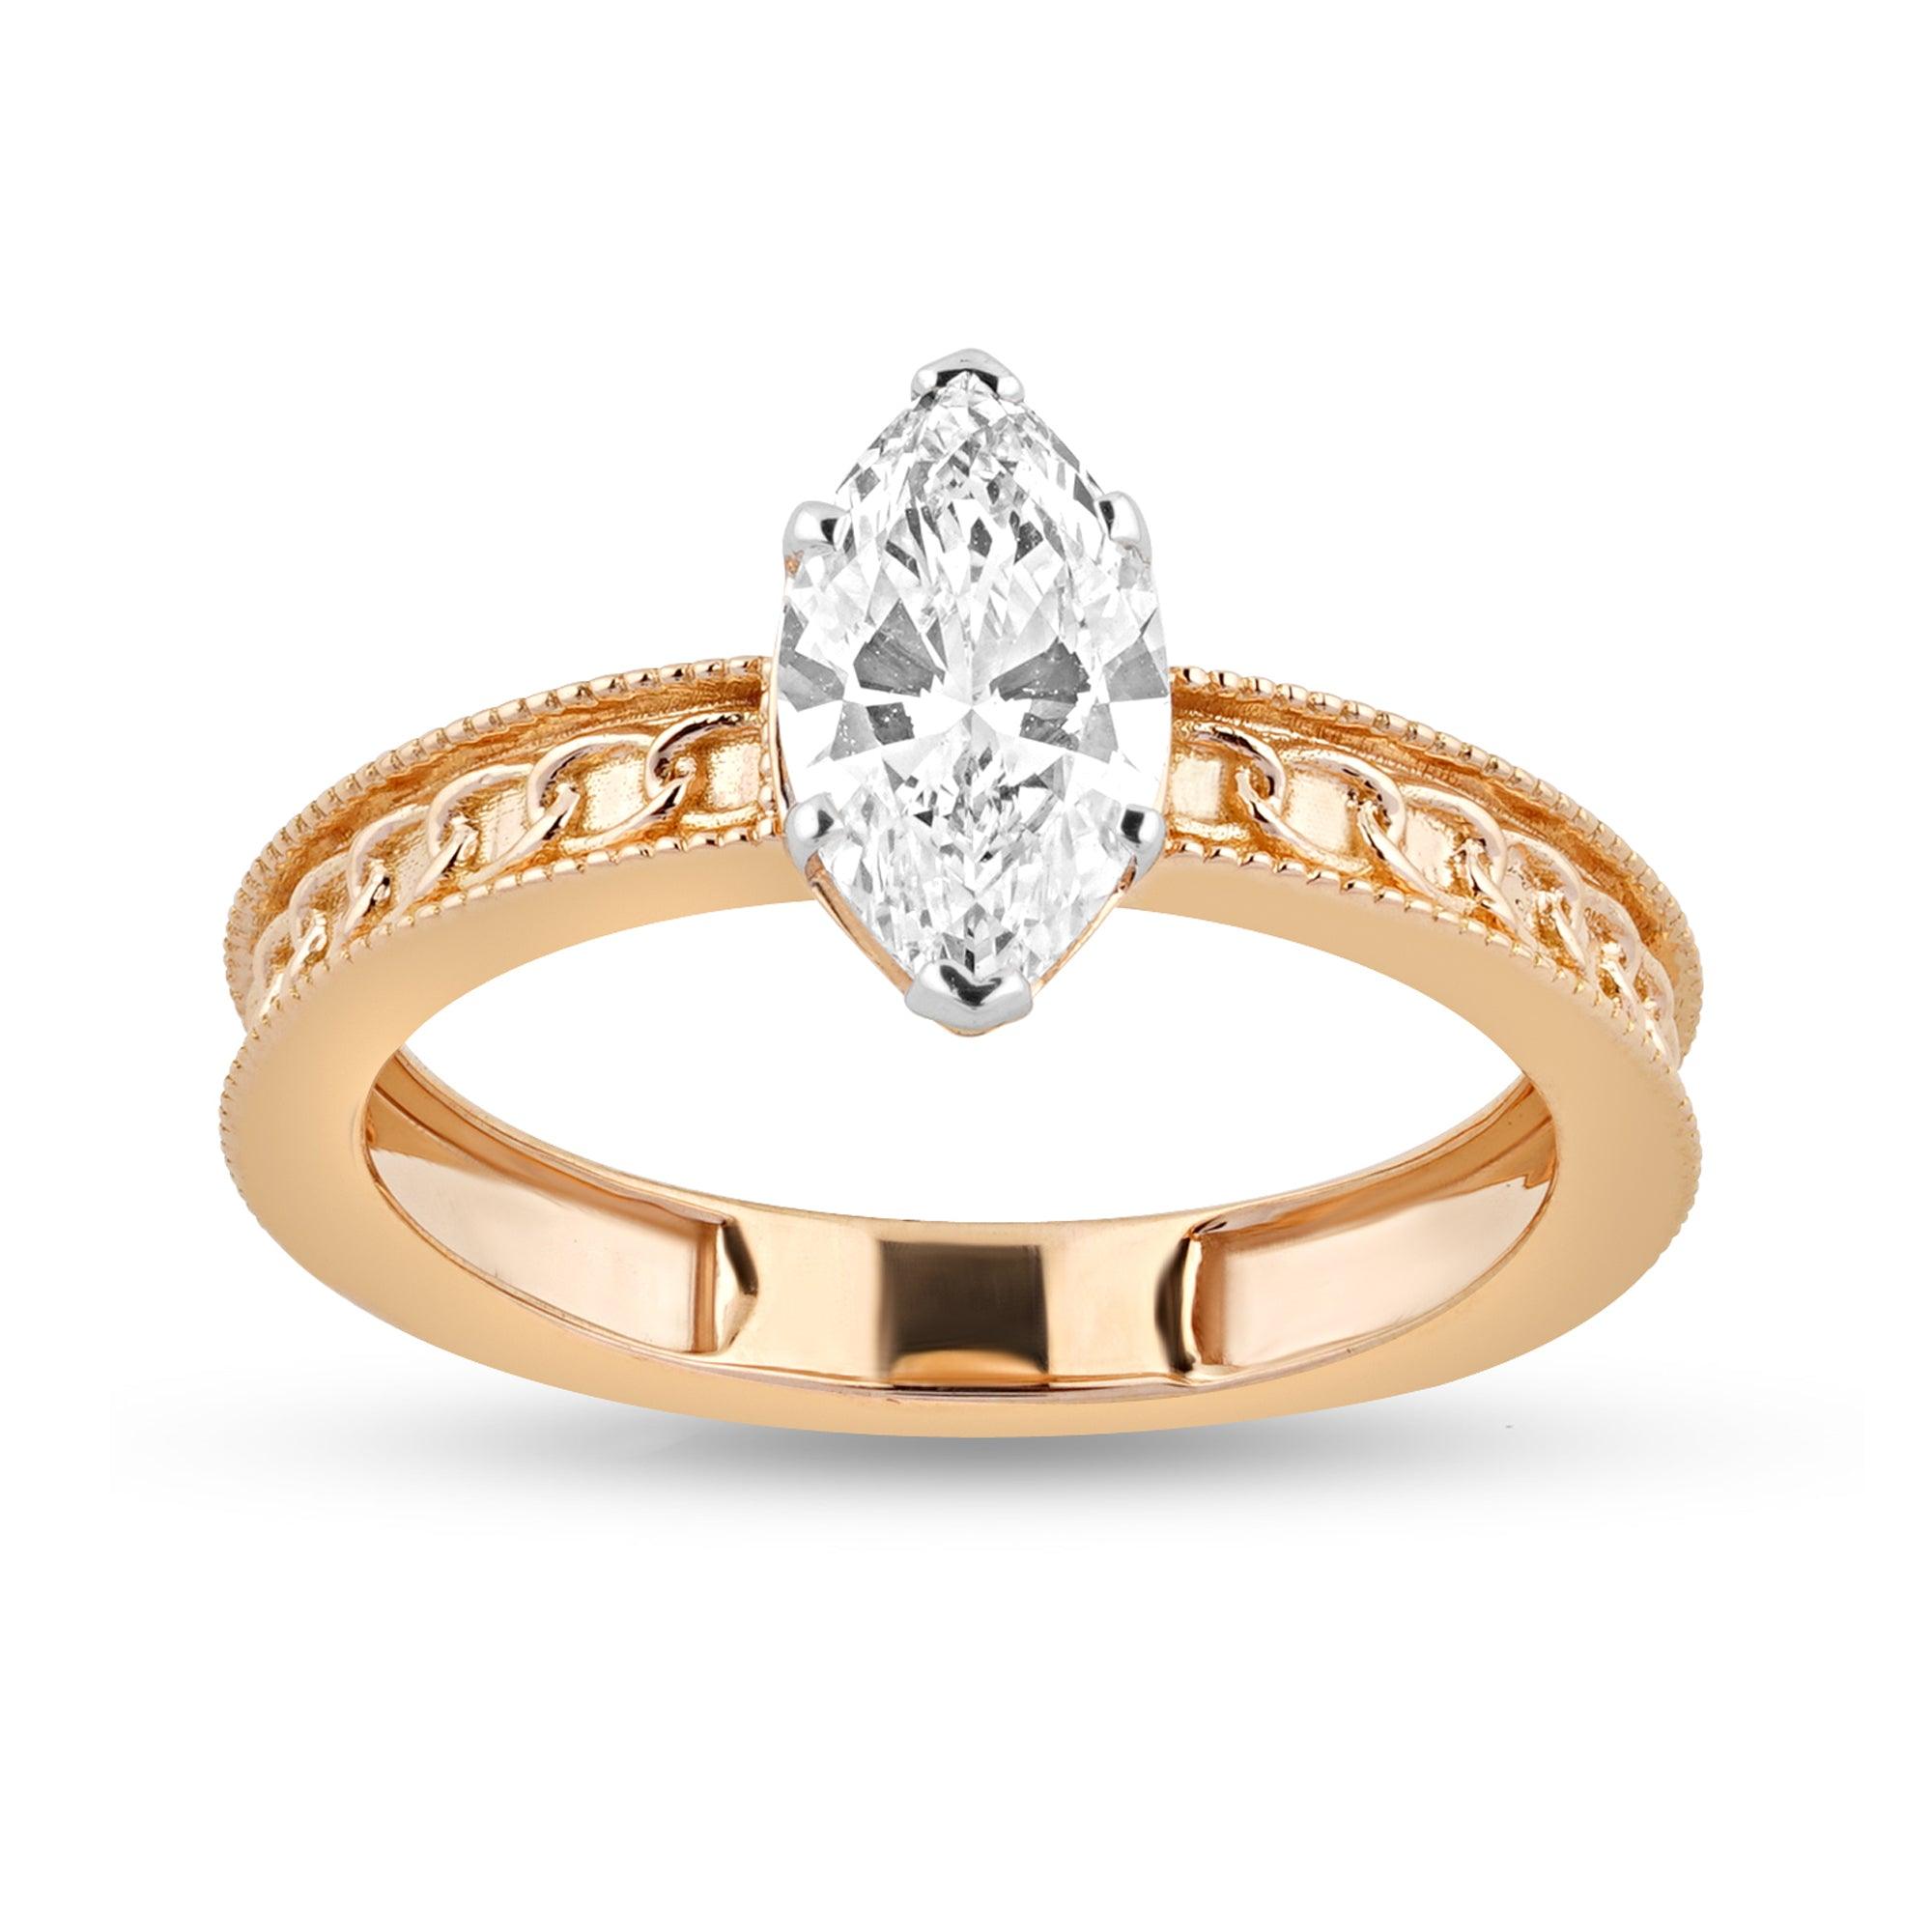 Entwined Solitaire Ring with 1.02ct Marquise Lab Diamond - Harmony Bound